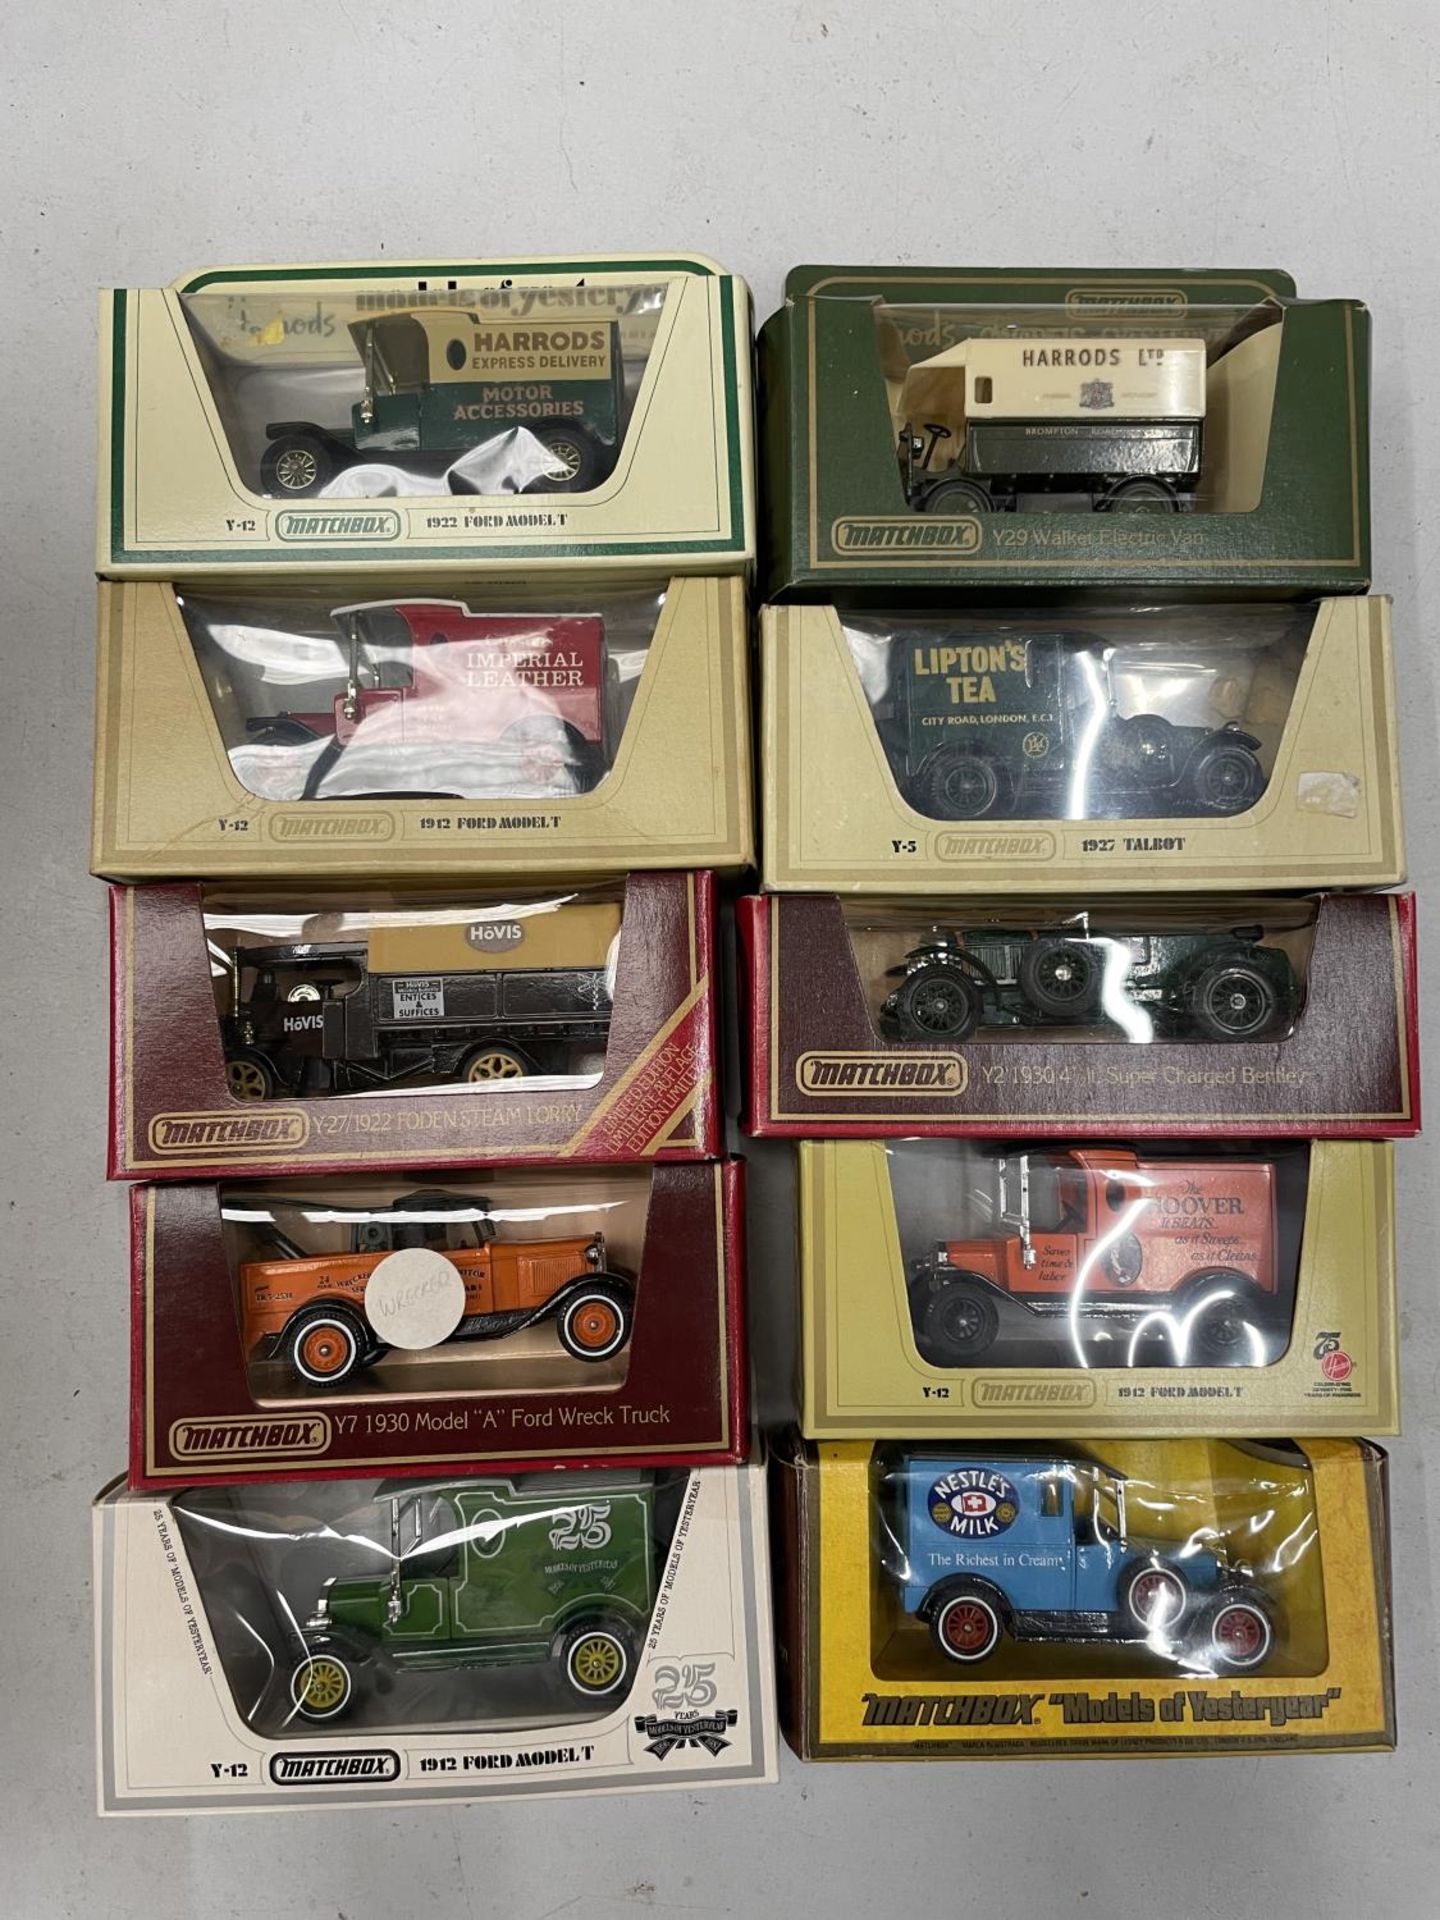 TEN BOXED MATCHBOX MODELS OF YESTERYEAR ADVERTISING WAGONS